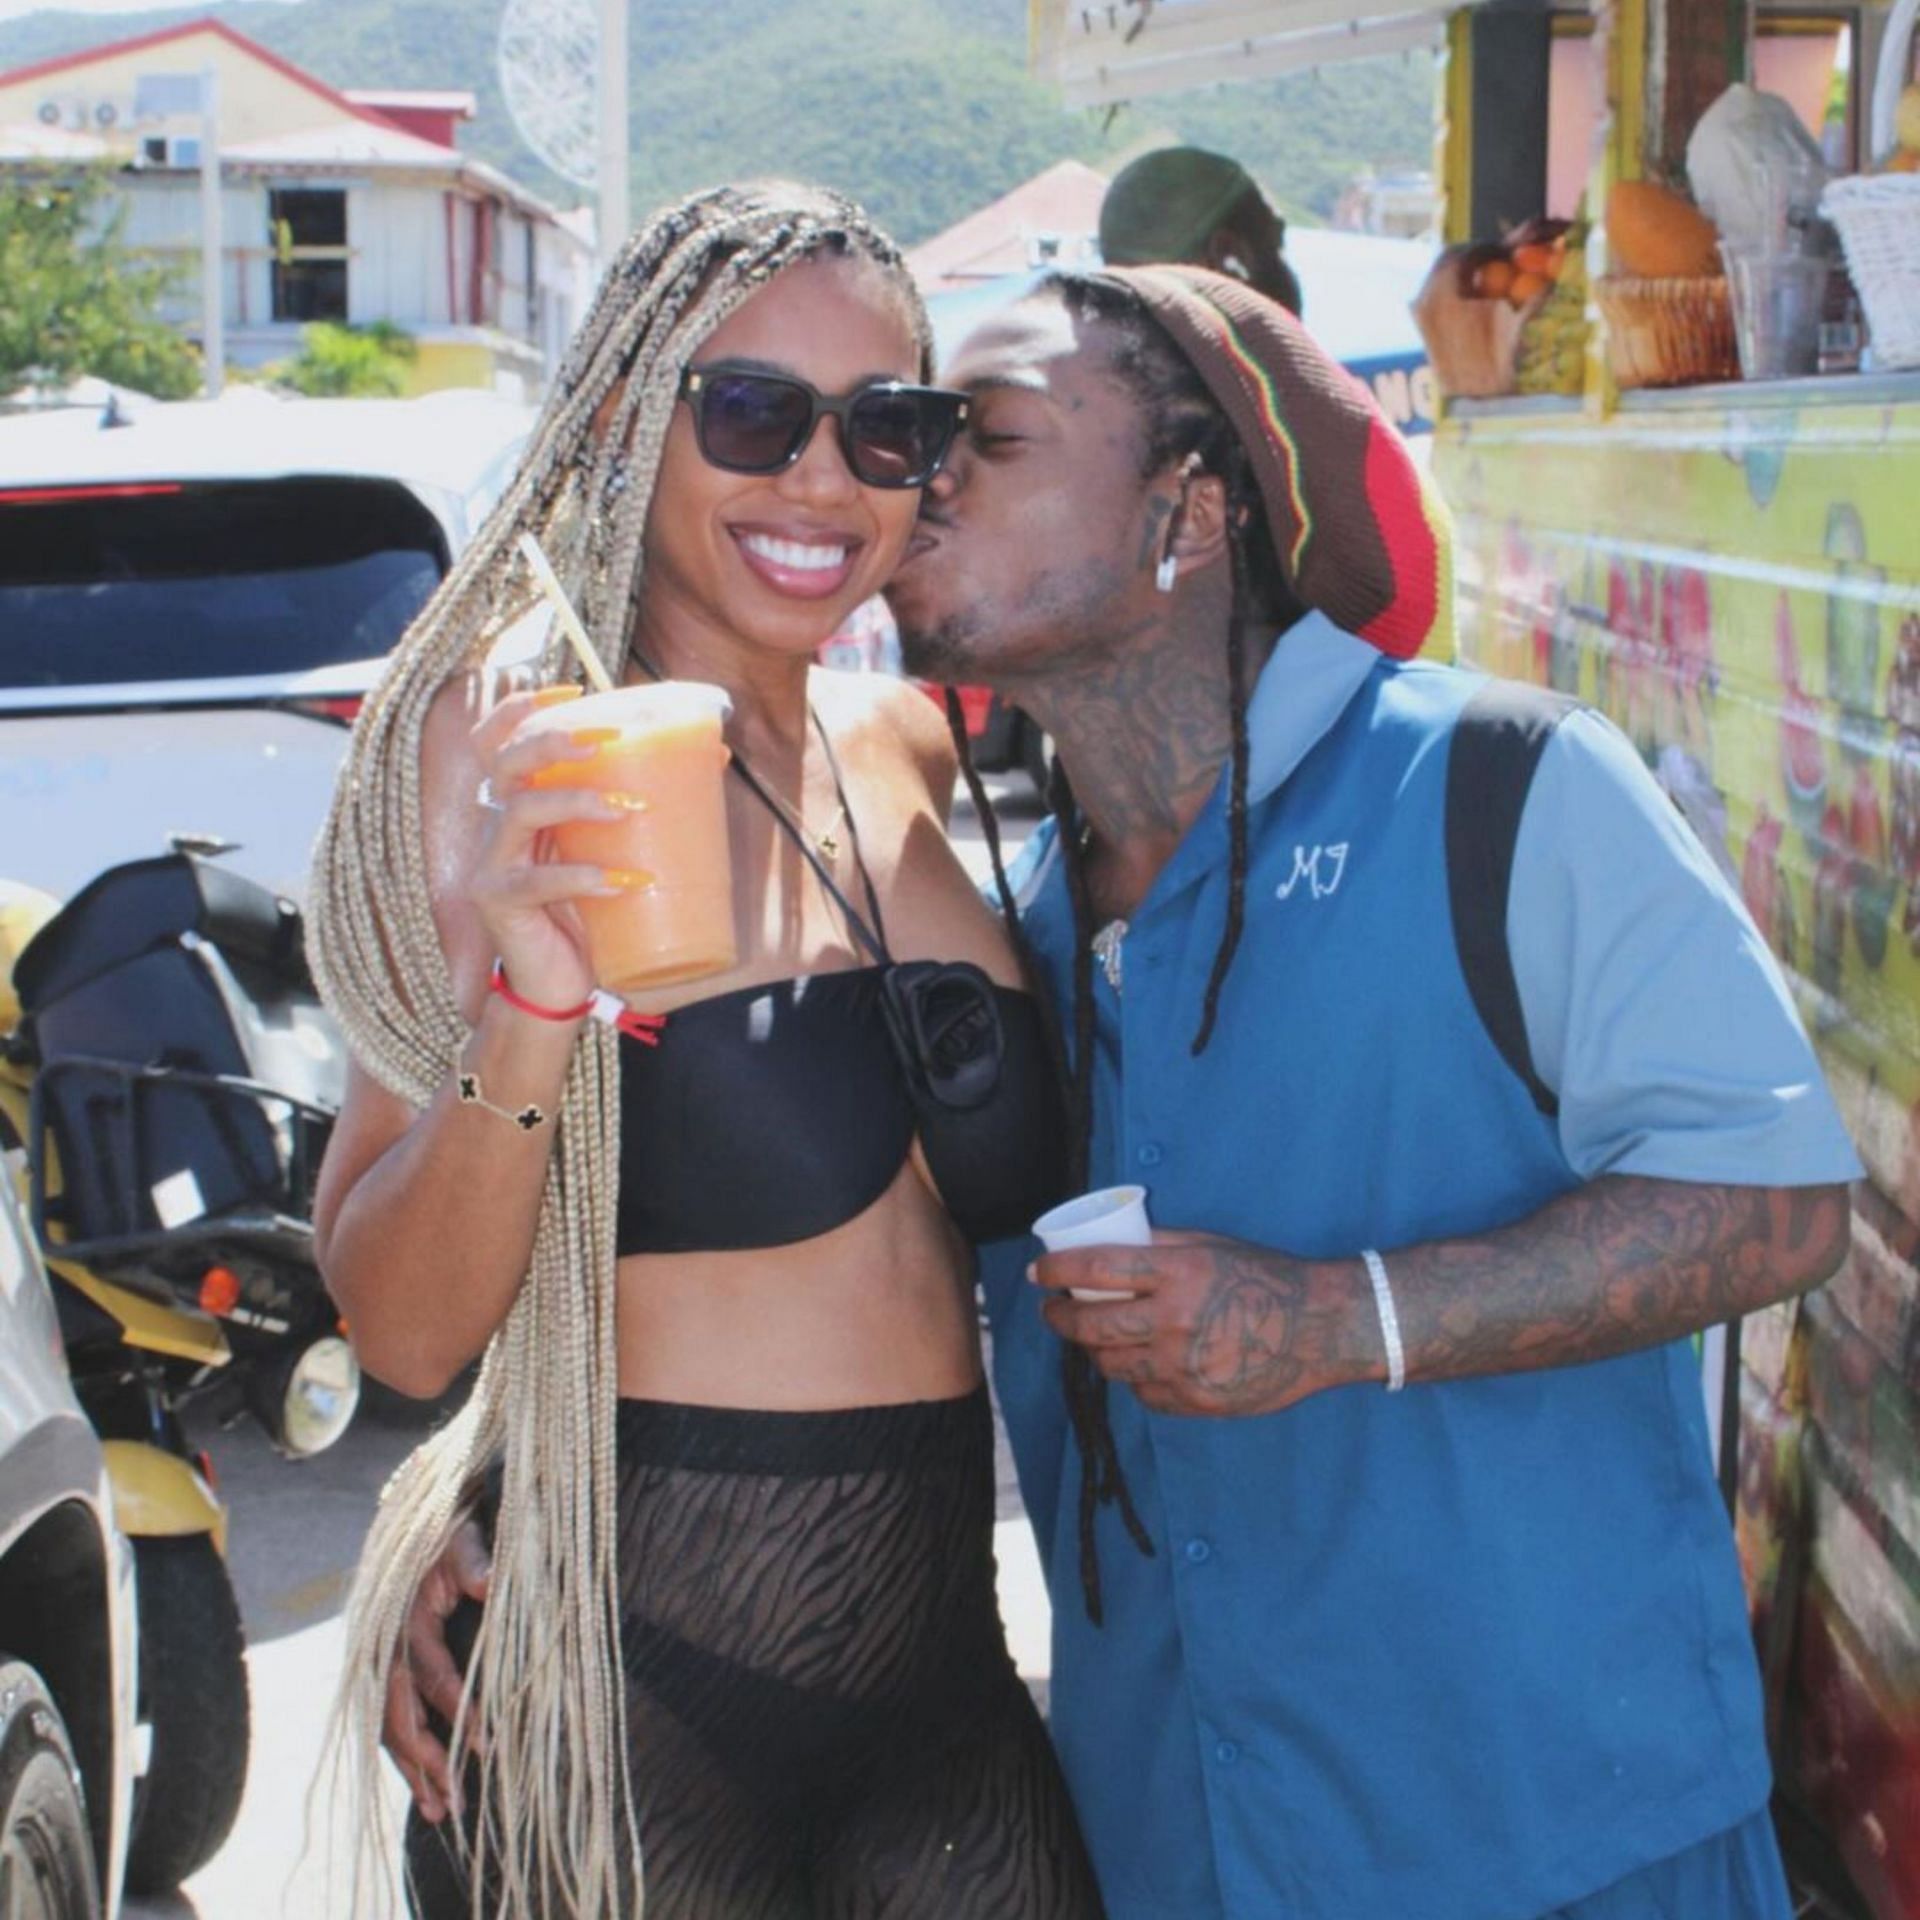 Jacquees and Deiondra are sharing a moment.